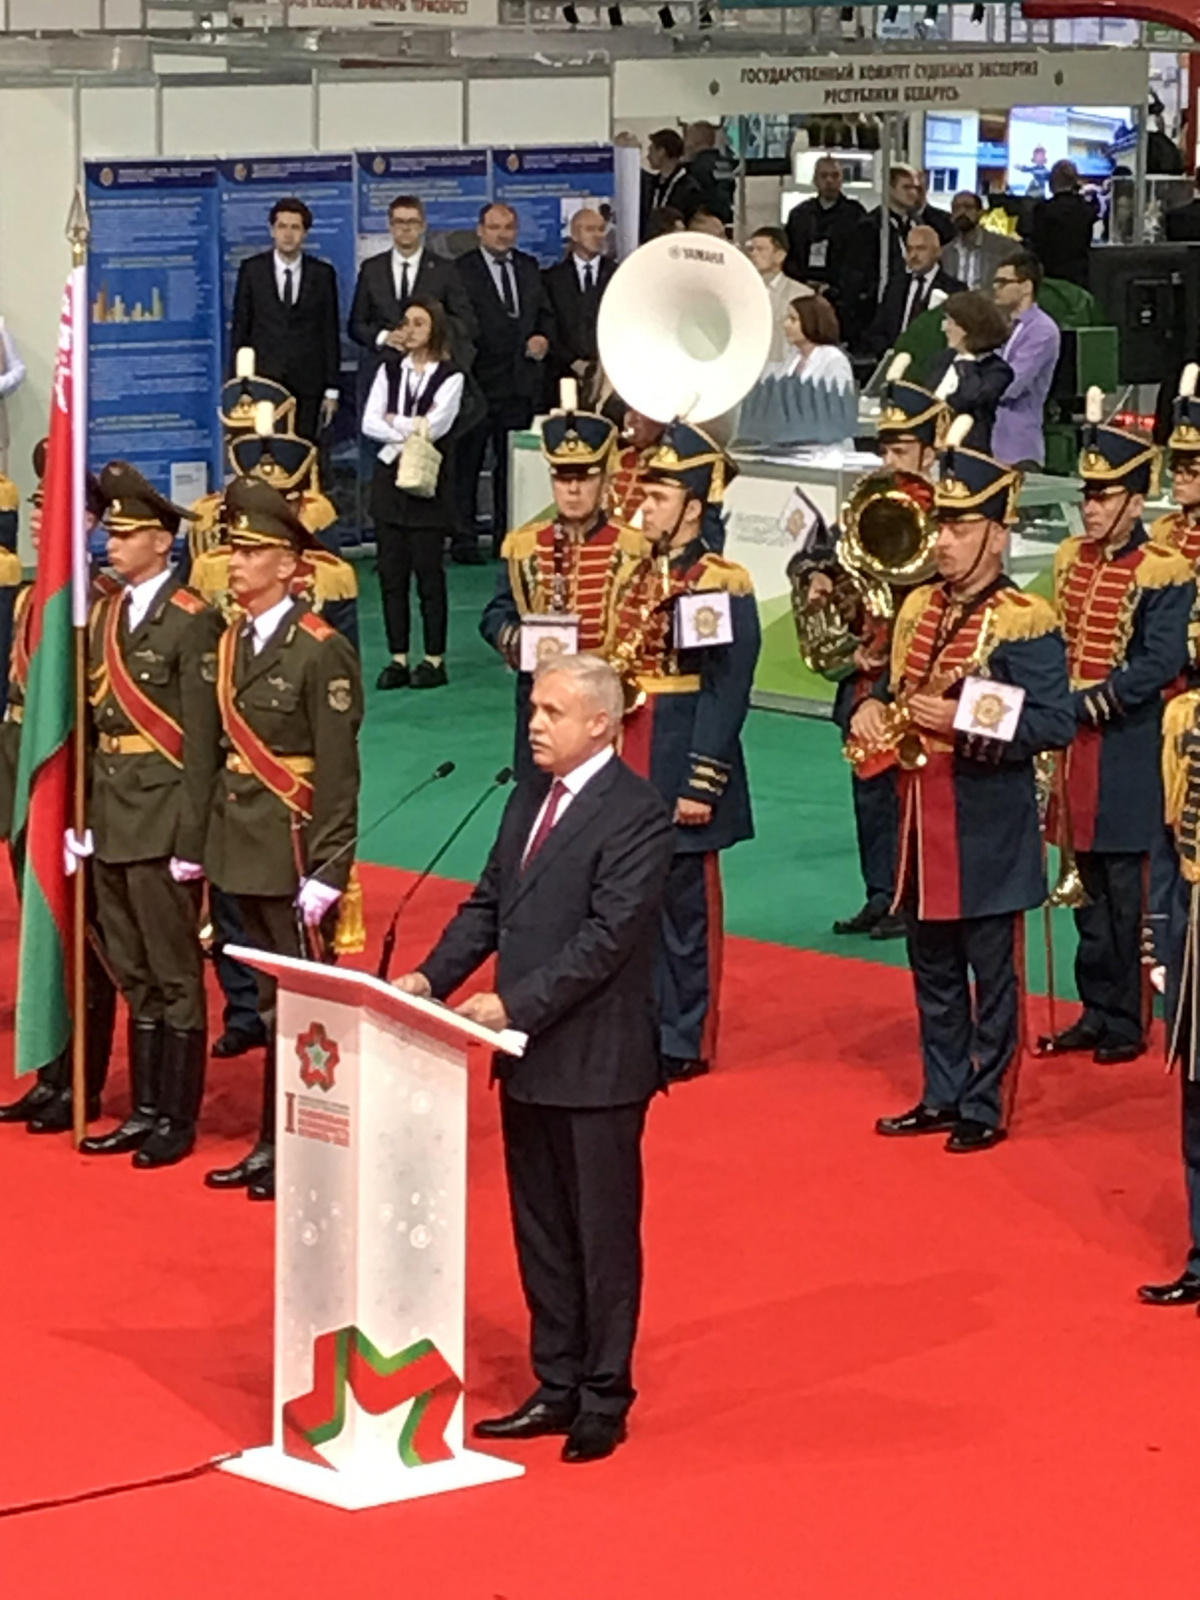 CSTO Secretary General Stanislav Zas took part in the opening ceremony of the 1st International Security Industry Exhibition "National Security. Belarus-2022".